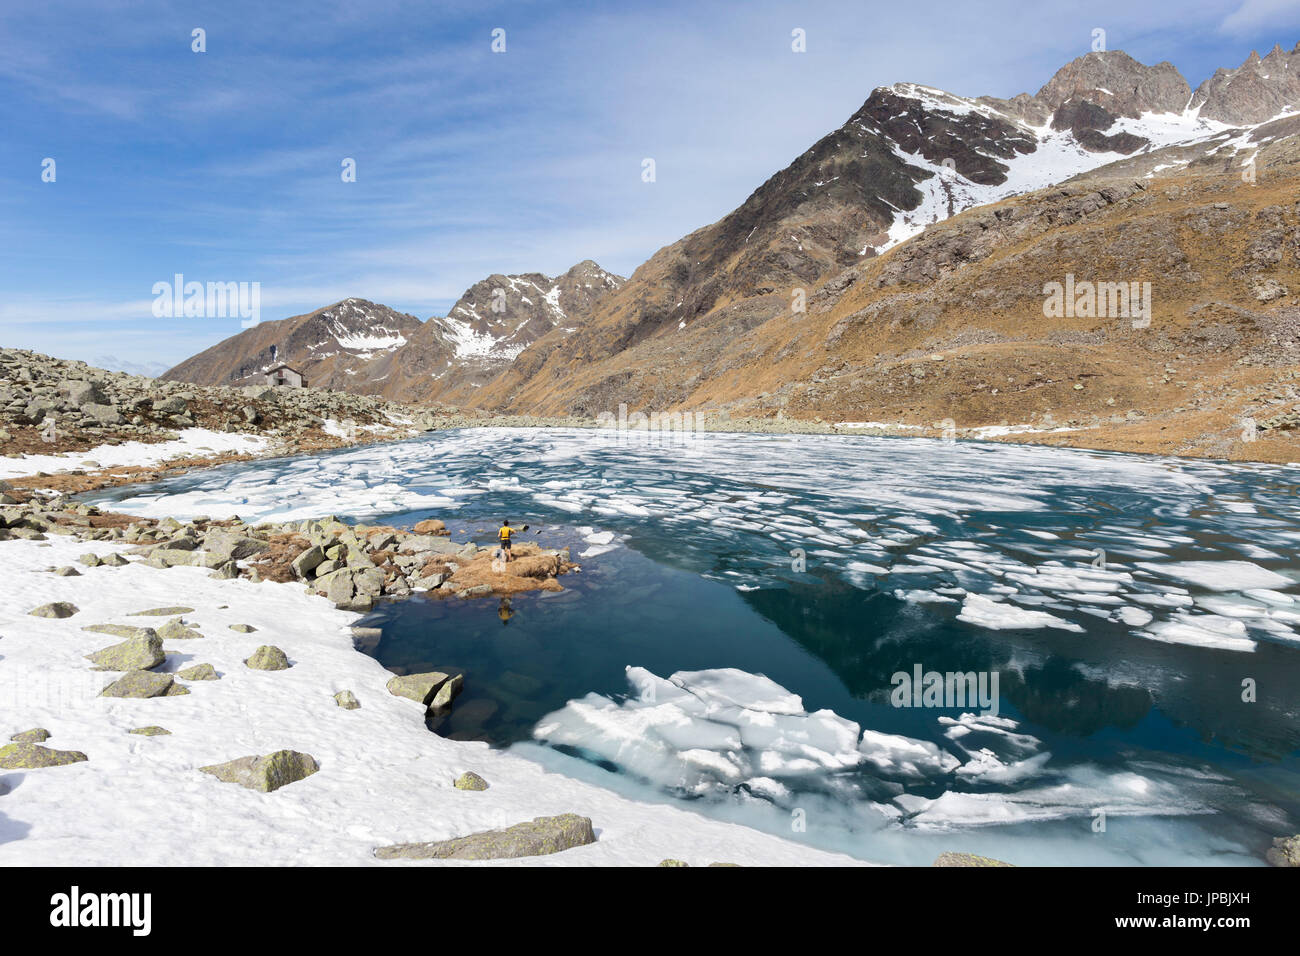 Ice and clear water at Lago Rotondo during thaw Val Malga Adamello Regional Park province of Brescia Lombardy Italy Europe Stock Photo